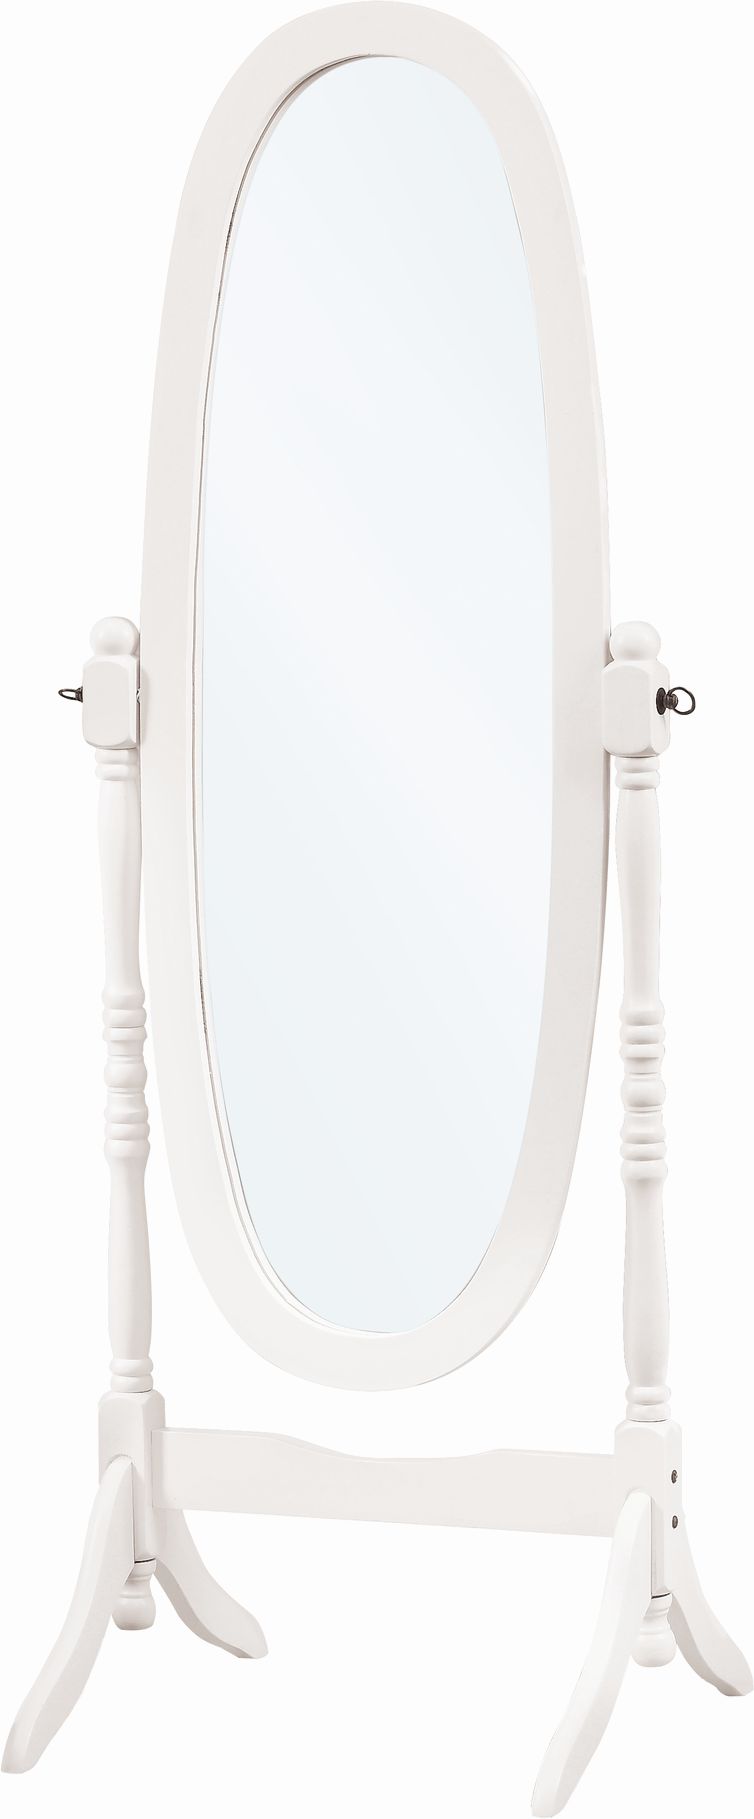 Antique White Monarch Specialties Solid Wood Oval Cheval Mirror